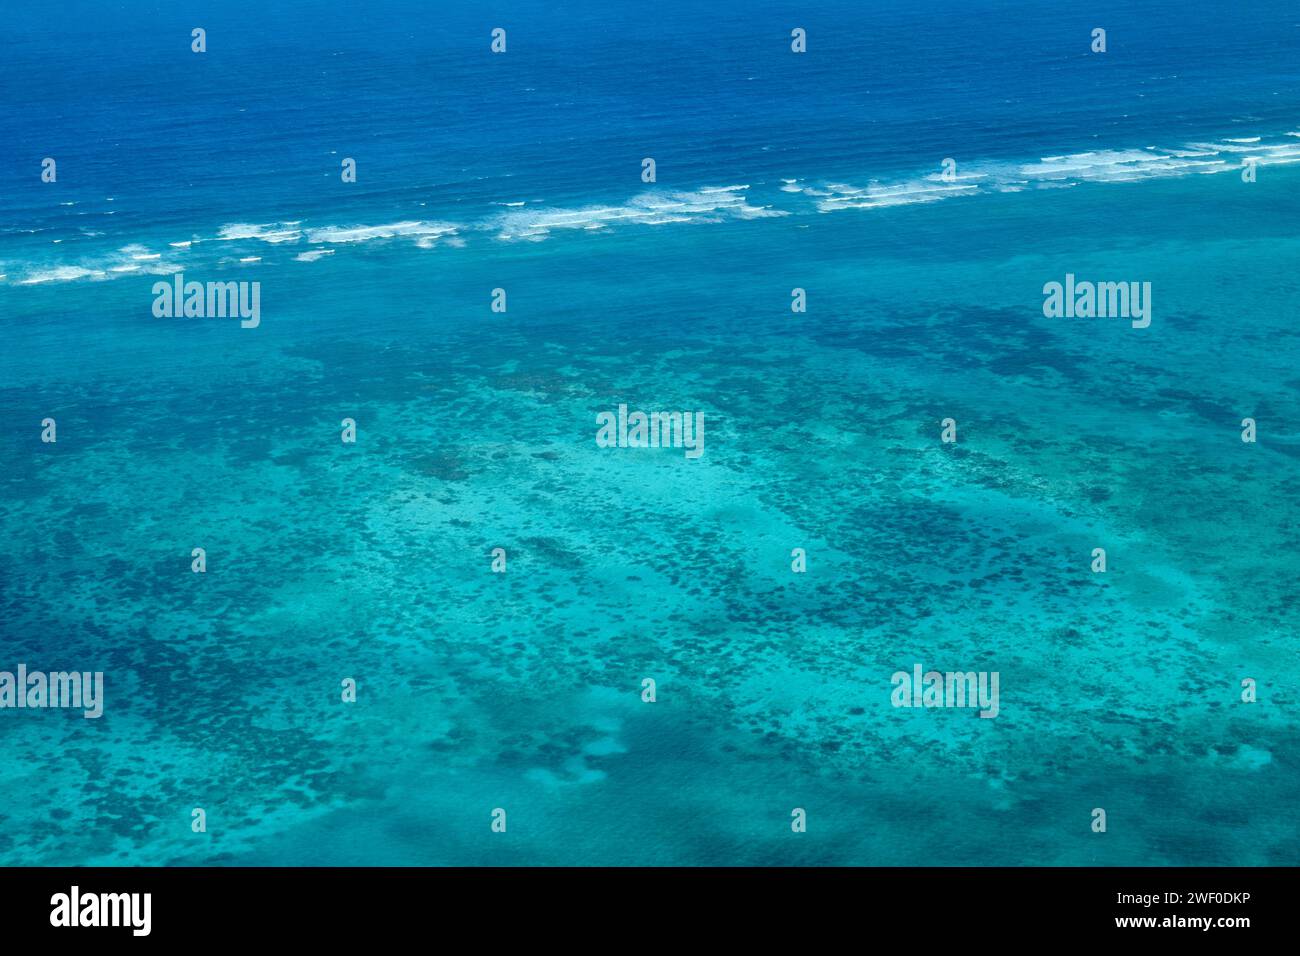 An aerial view of the Belize Barrier Reef, which is part of the ...